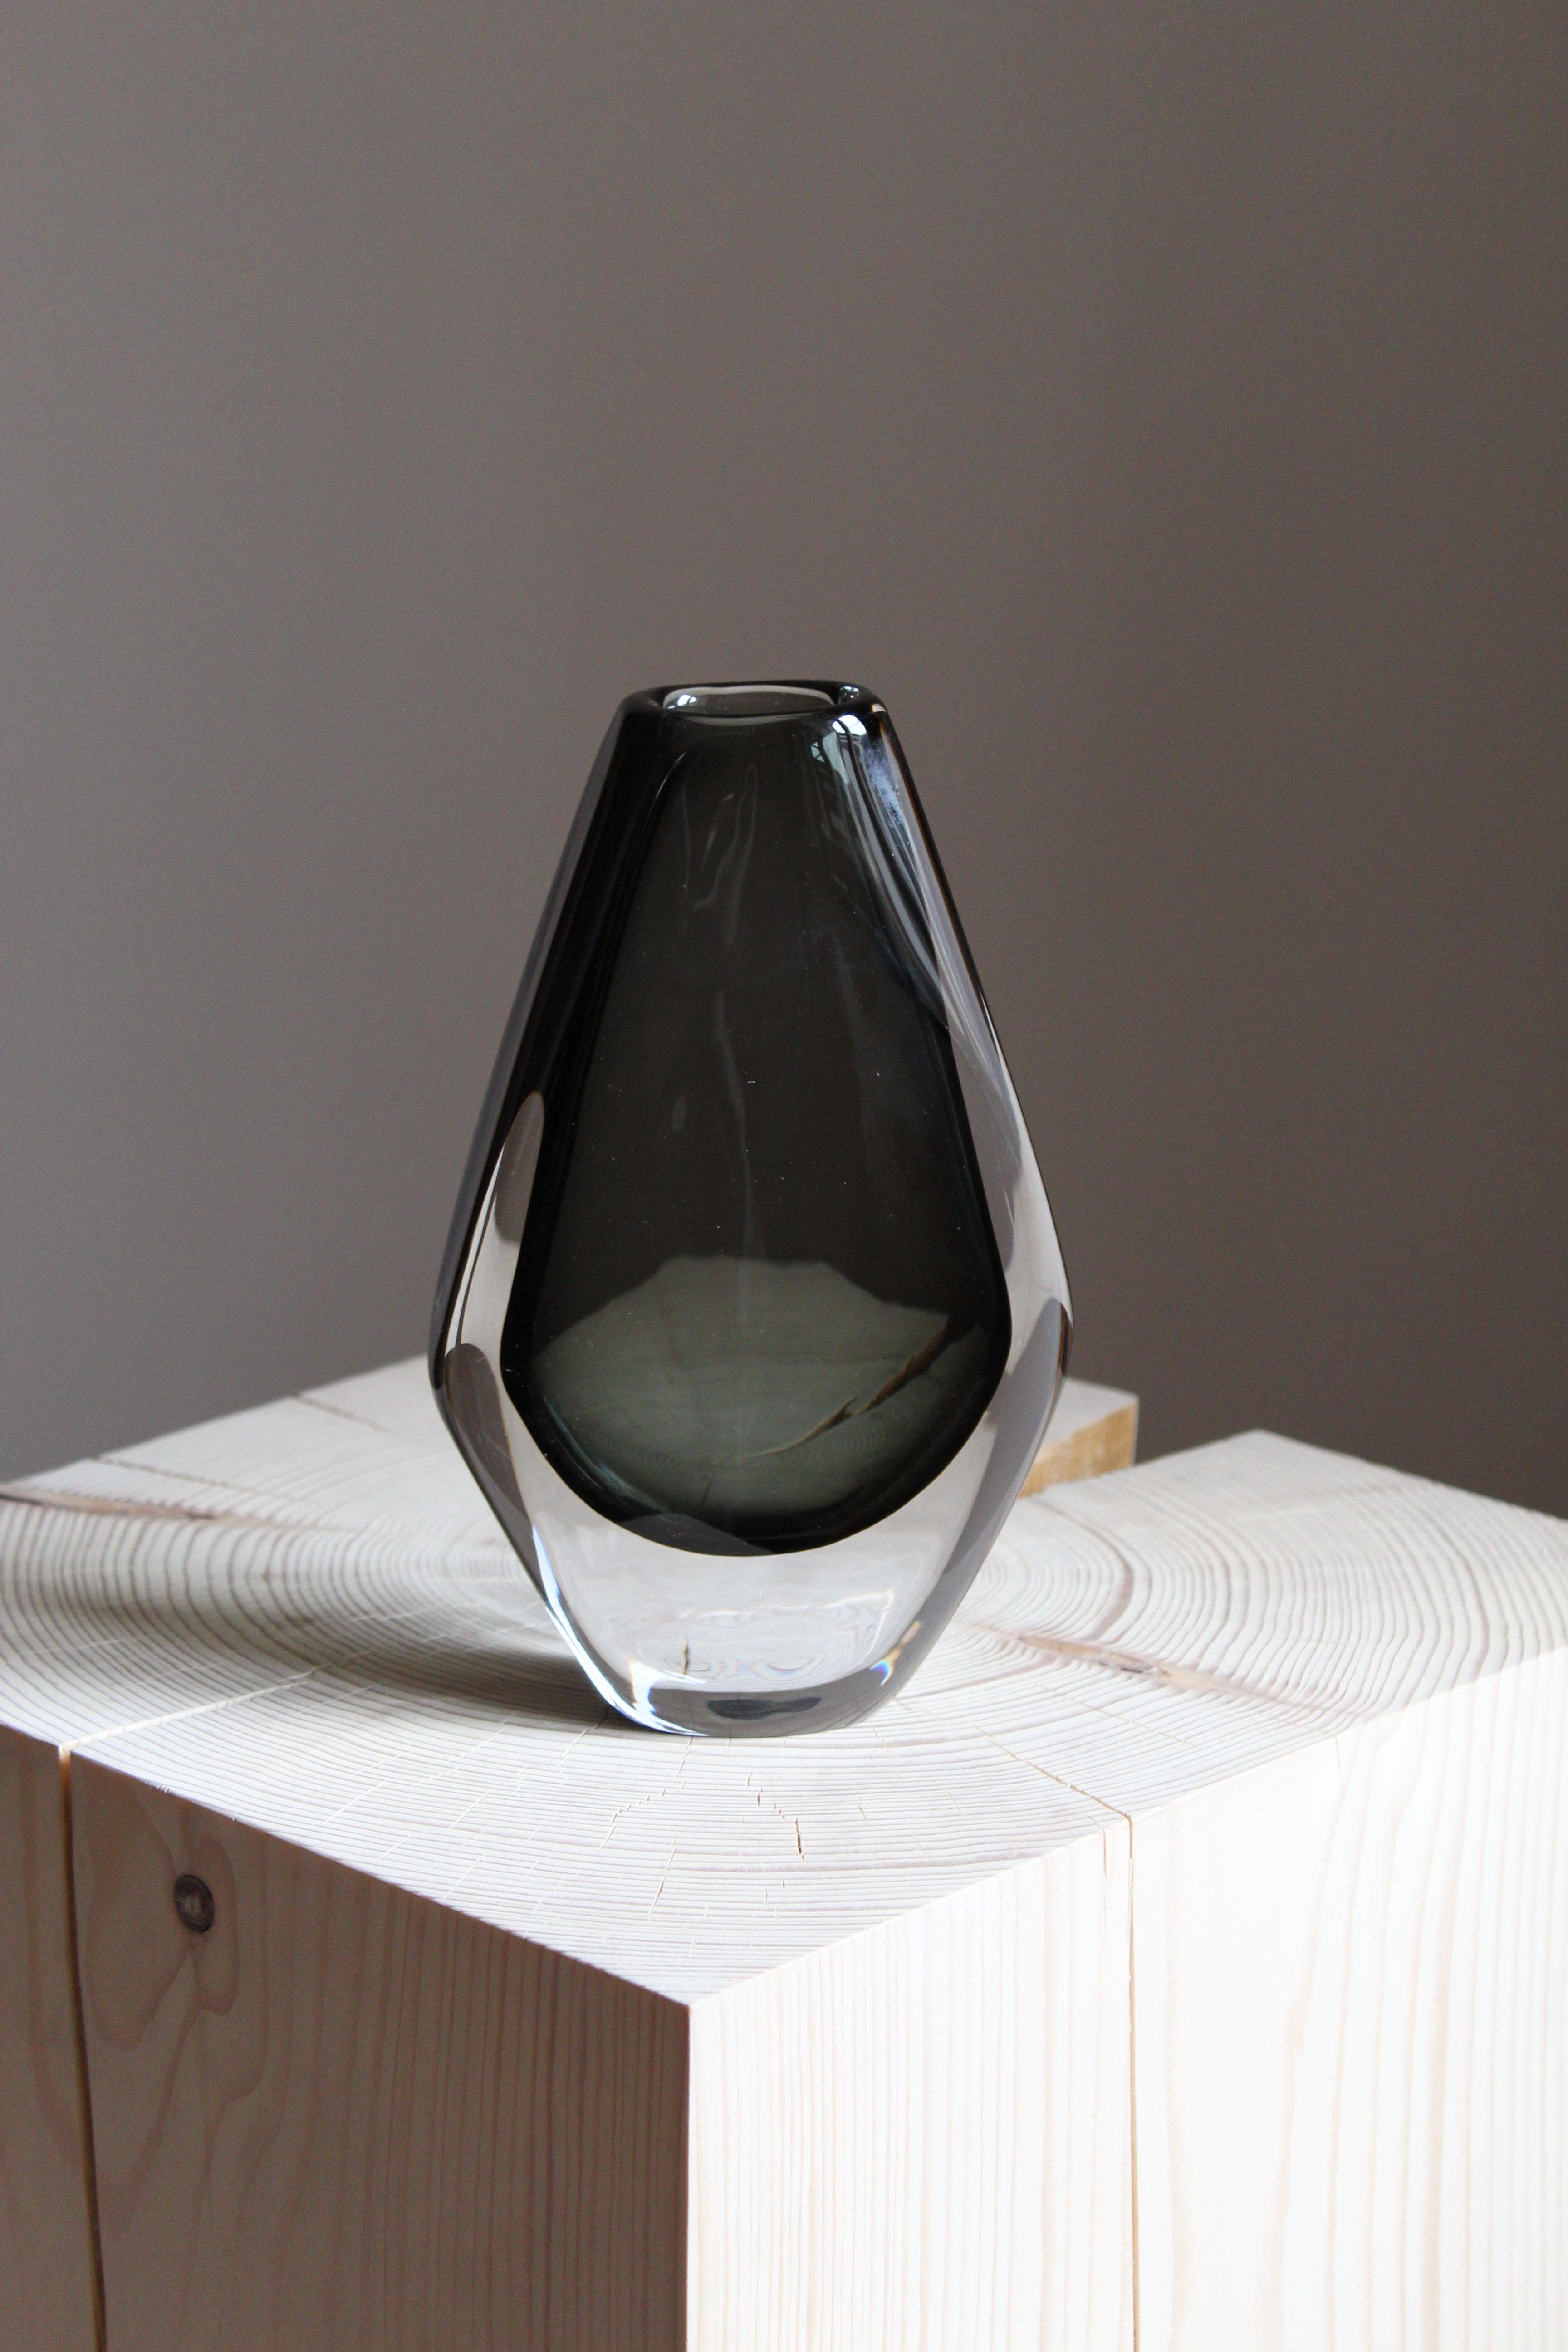 A vase. Blown glass. Designed by Nils Landberg, produced by Orrefors, 1950s. Unsigned.



